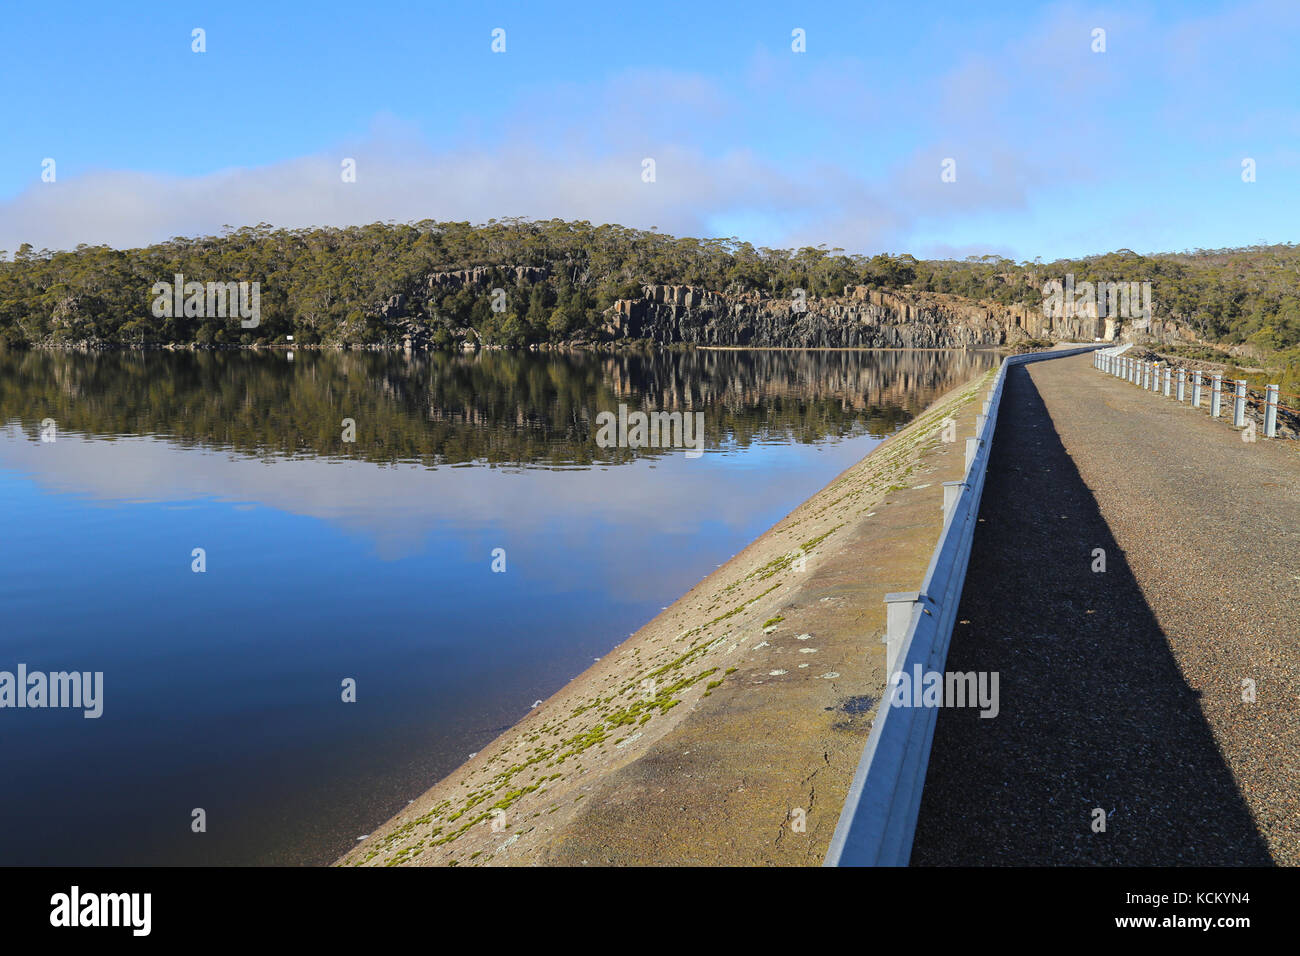 Lake Mackenzie and the dam that greatly increased its size. Central Plateau Conservation Area, Great Western Tiers, northern Tasmania, Australia Stock Photo